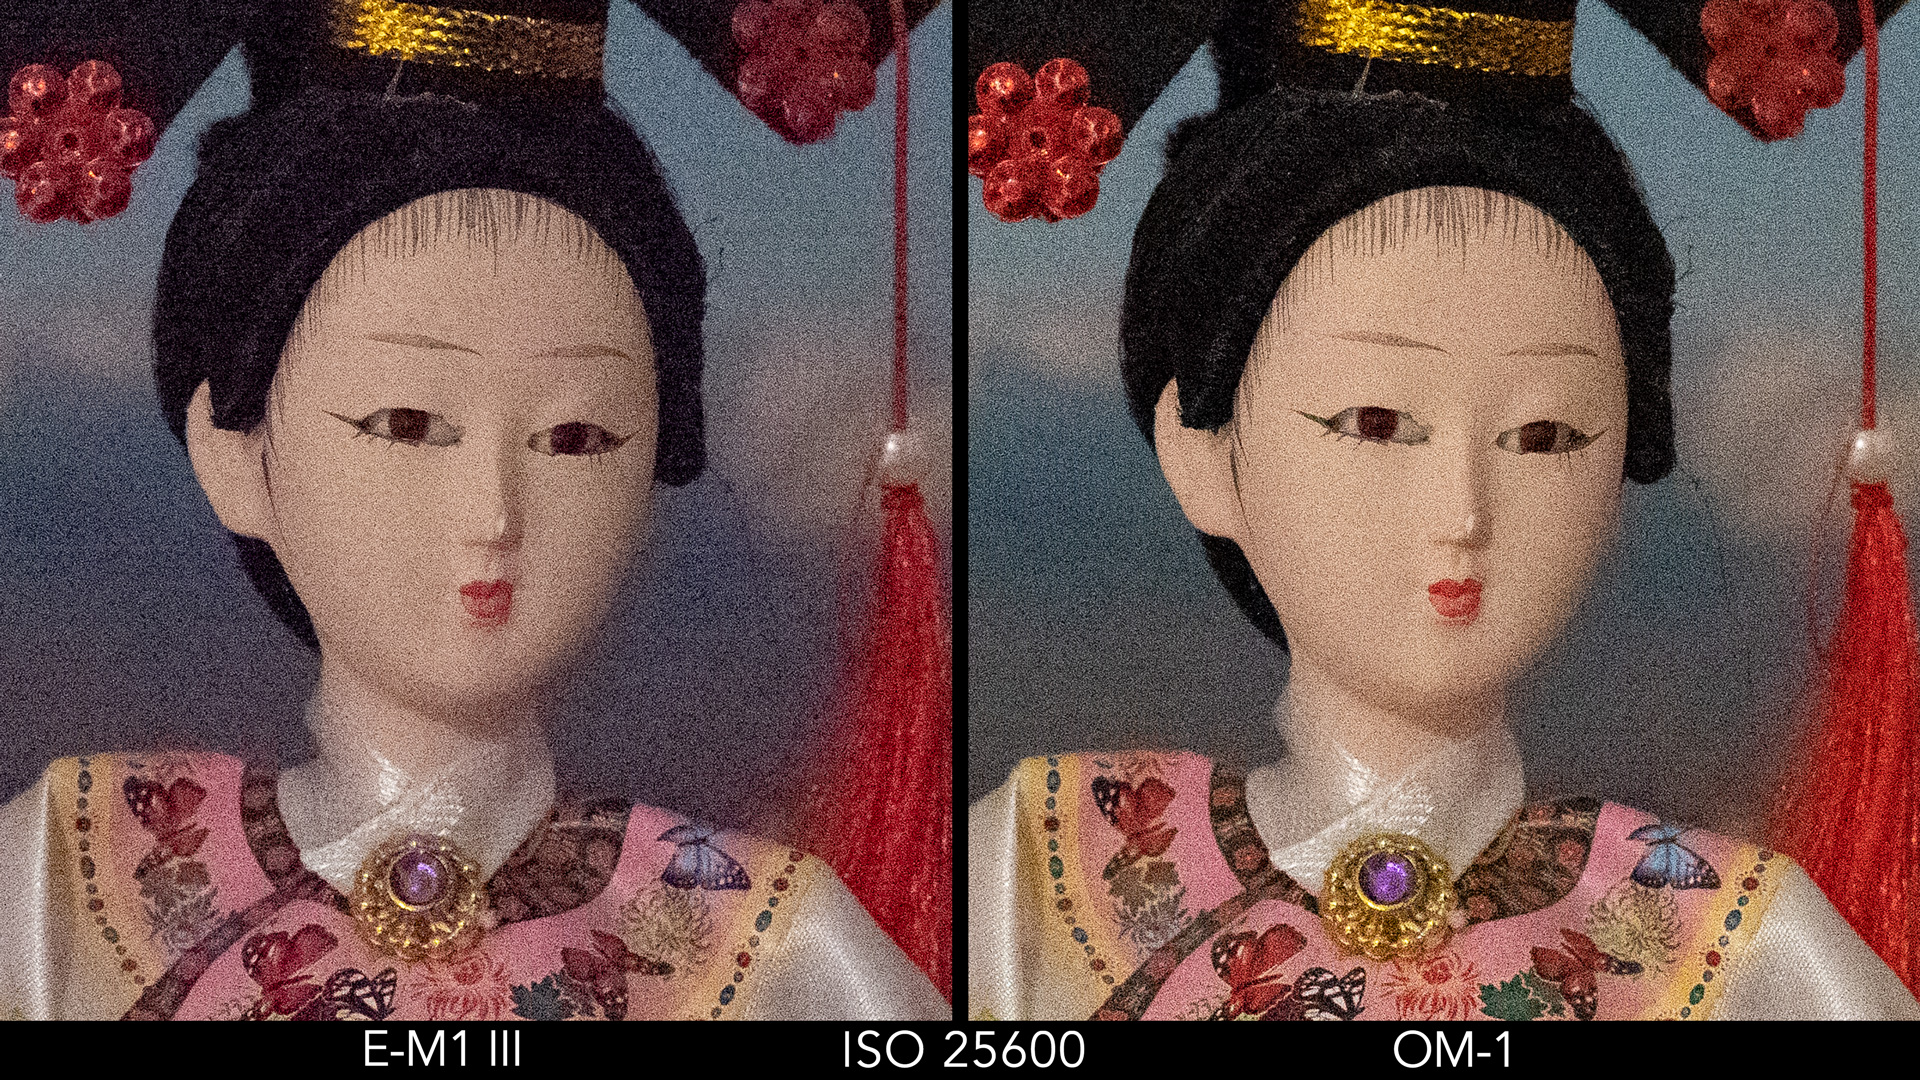 side by side image of a Japanese doll comparing ISO 25600 for the E-M1 III and OM-1